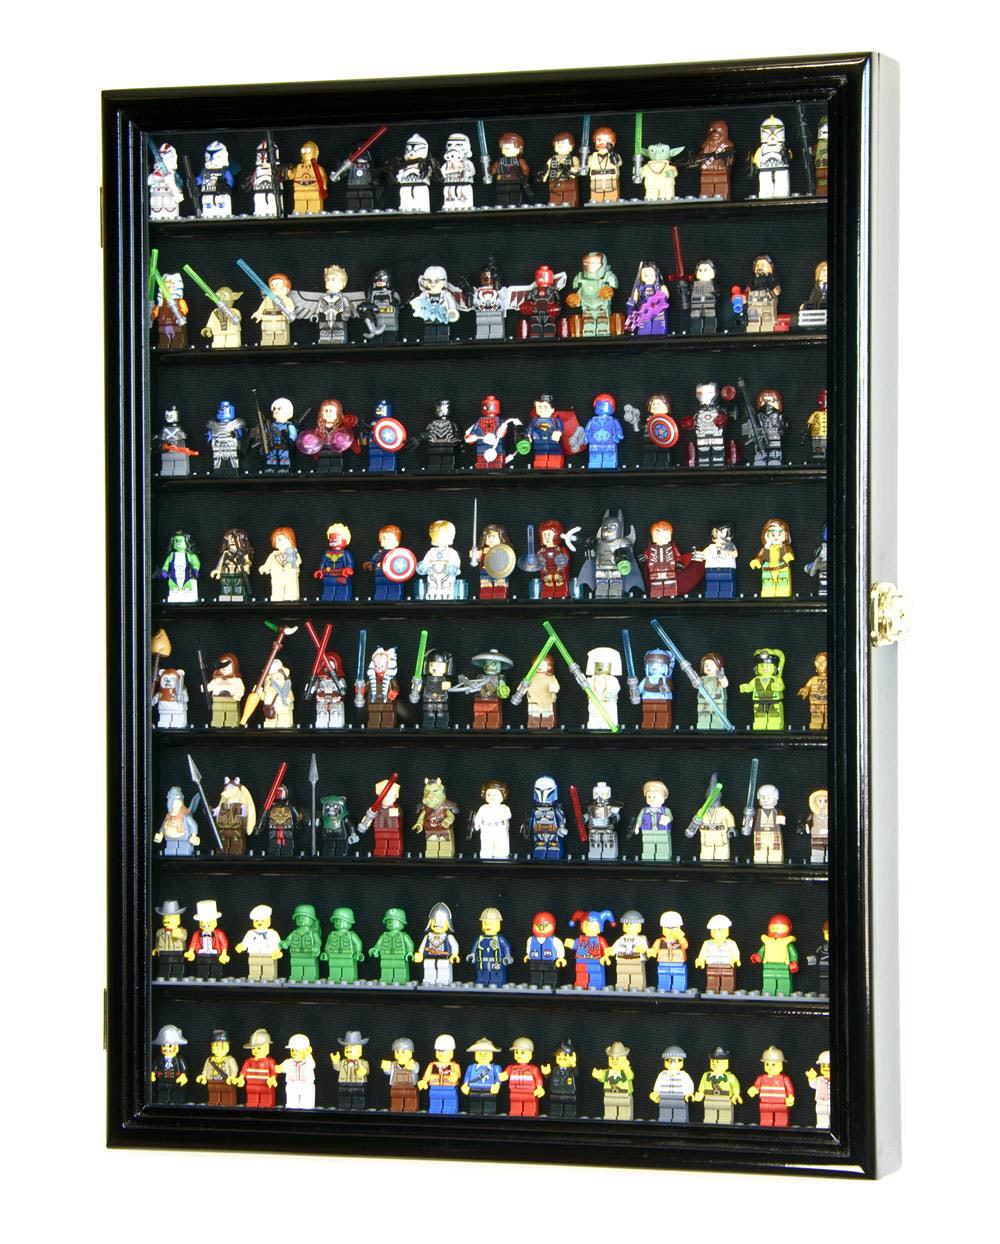  59 Opening Thimble/Small Miniature Display Case Cabinet Holder  Wall Rack 98% UV Lockable, Black : Sports Related Display Cases : Sports &  Outdoors